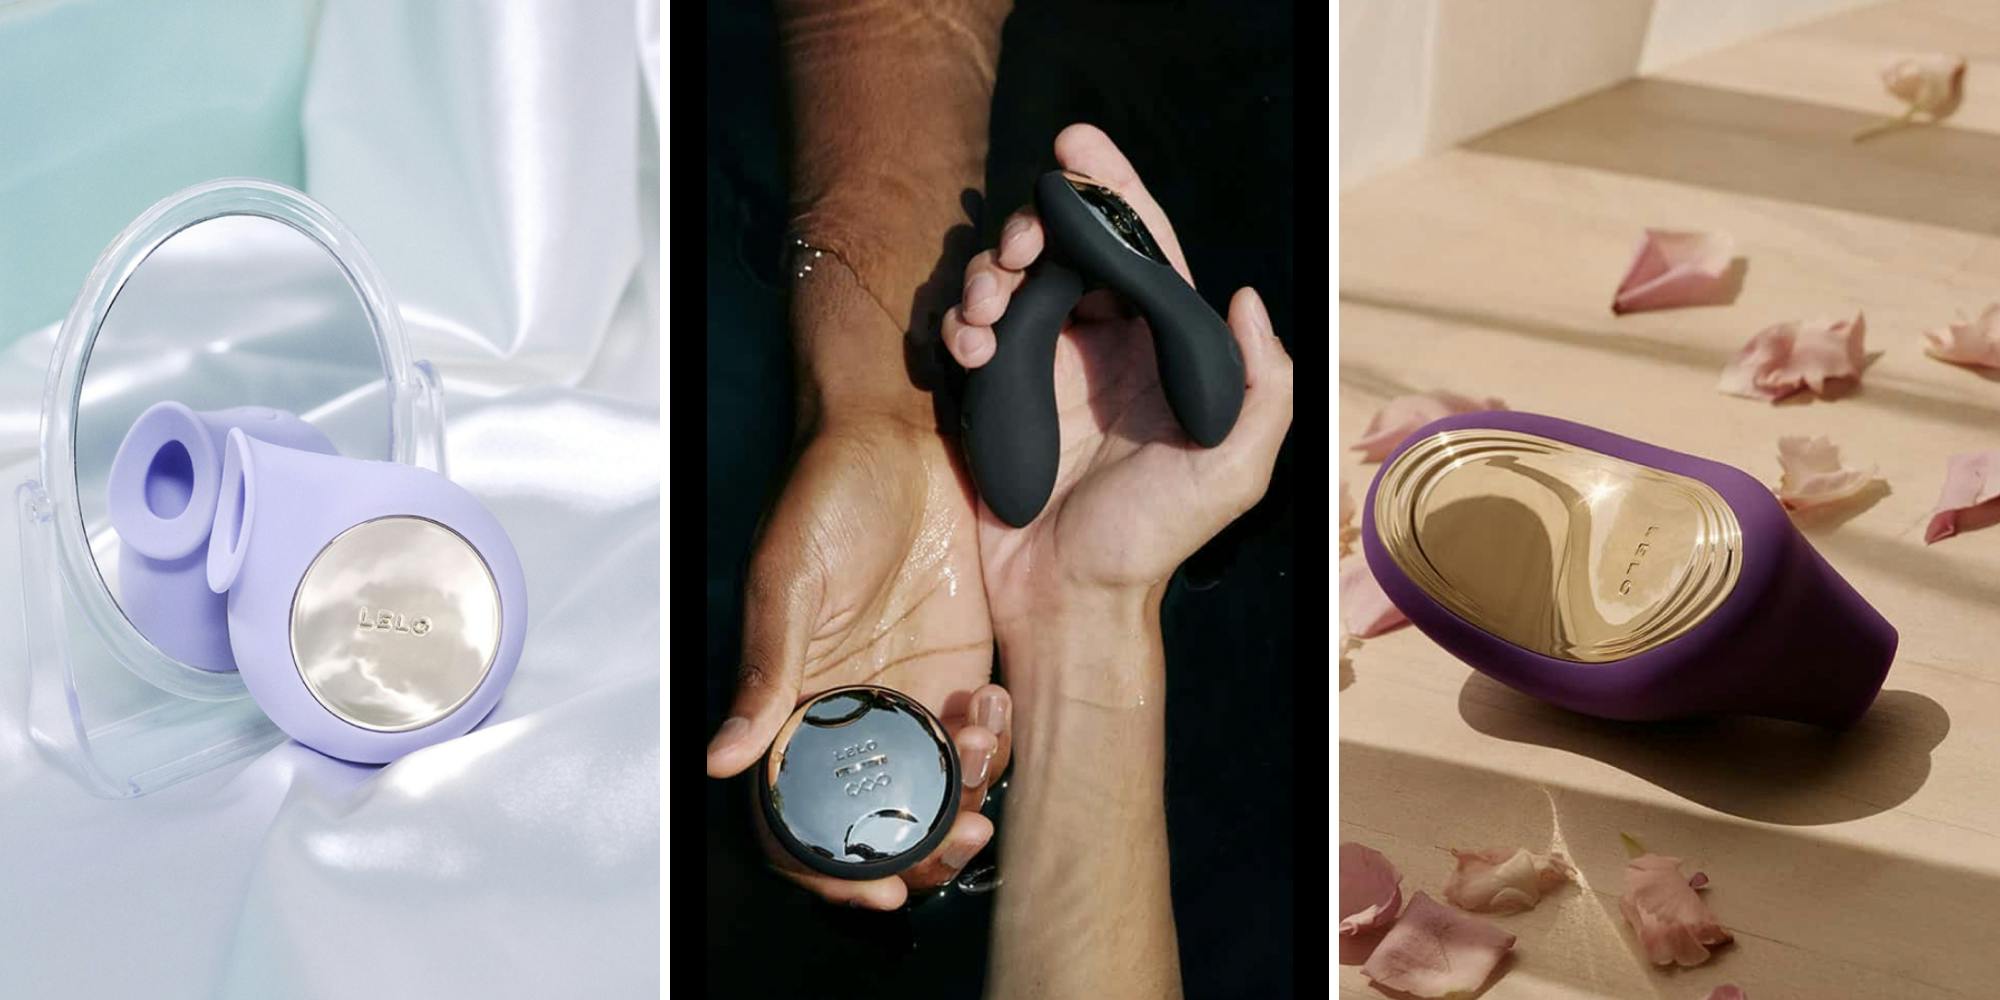 Guide to the best-selling LELO sex toys on the market